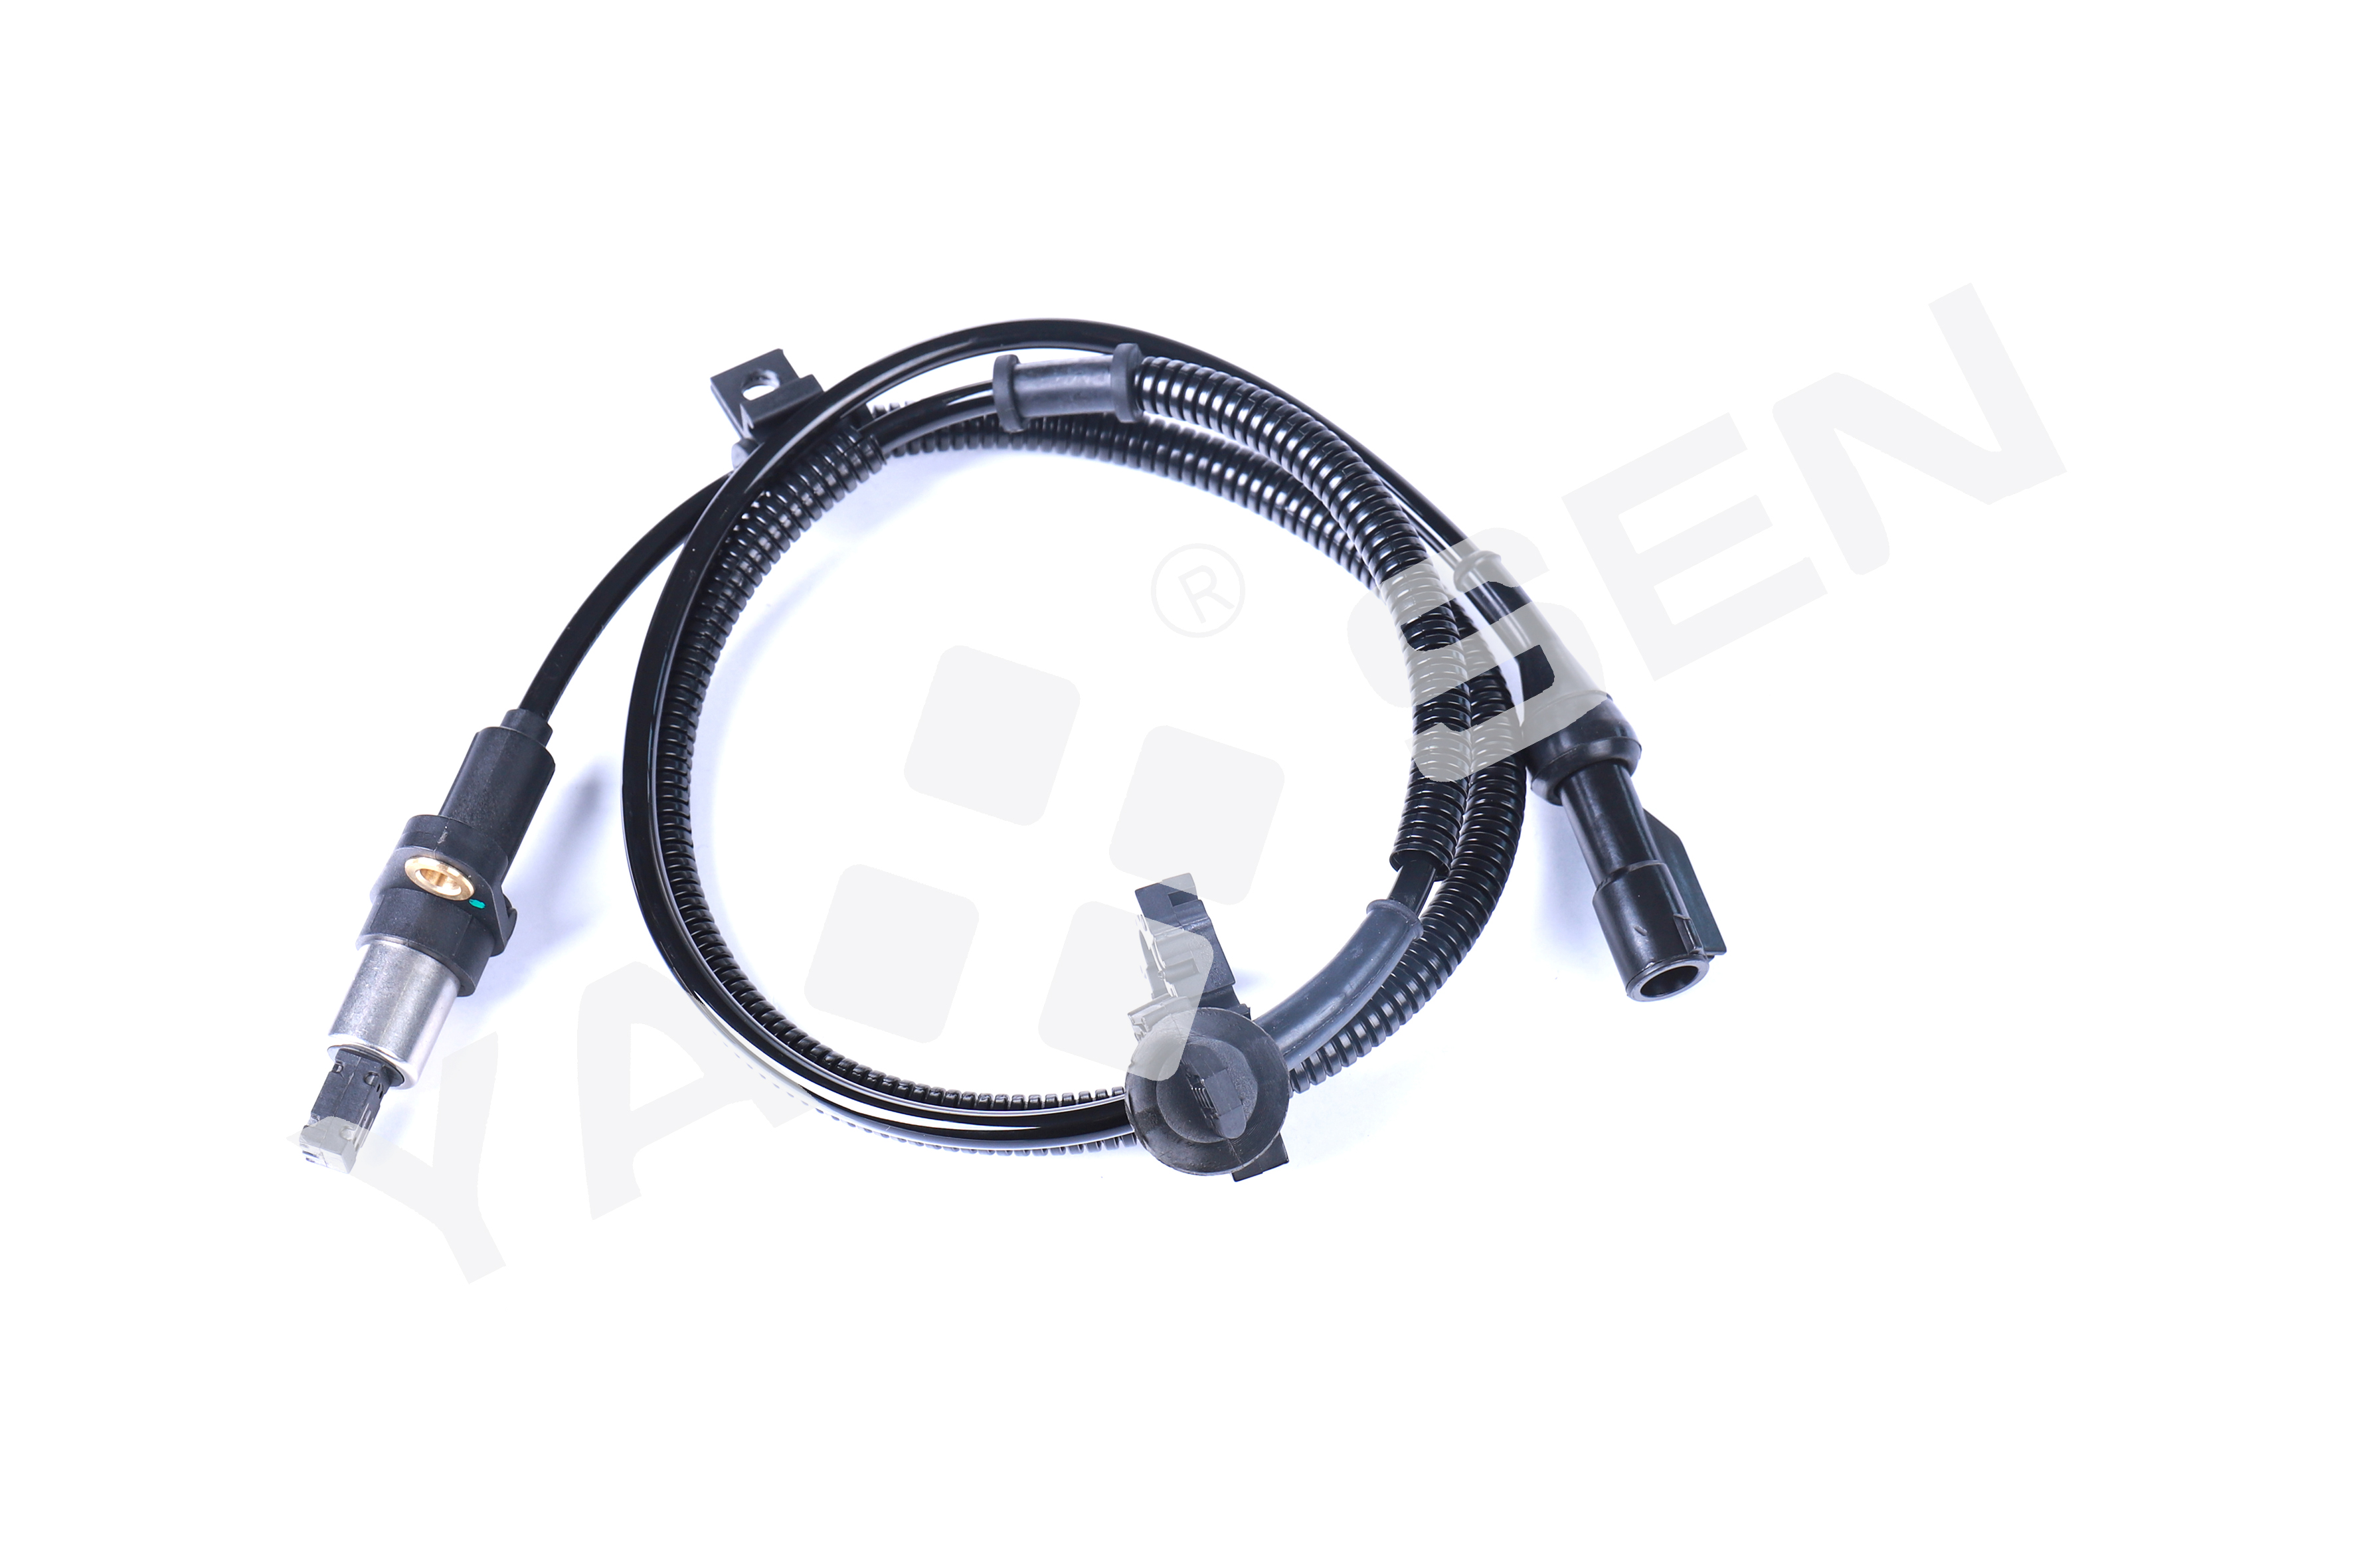 ABS Wheel Speed Sensor for FORD/DODGE  970274 5S6027 BRAB70 ALS170 19236227 SU7560 F81Z2C205AA F81Z2C205AC F81Z2C205AD